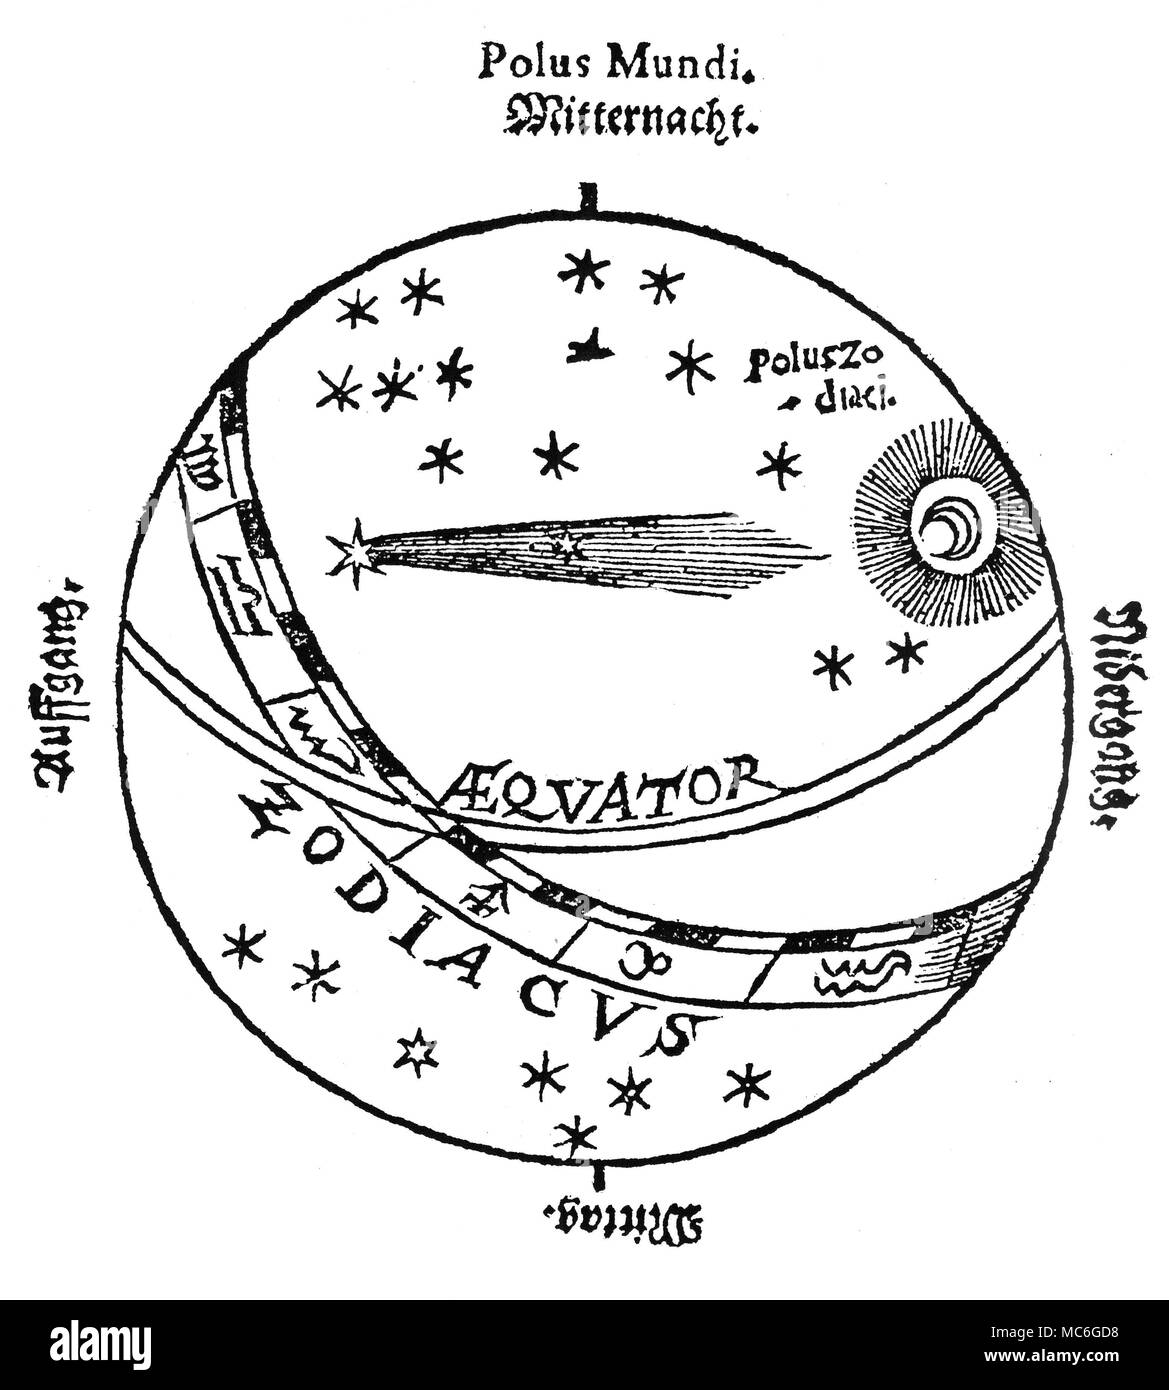 ASTROLOGY - COMETS Woodcut from the titlepage of Cometen Historia. Das ist: Kurtze Beschreibung der fuernembsten Cometen. The comet depicted is that of 1618. The zodiac, which is given such emphasis in this cut, was important in mediaeval cosmetology, as the part of the zodiac from whence a comet arose (or was first seen) was held to determine its predictive significance. Stock Photo